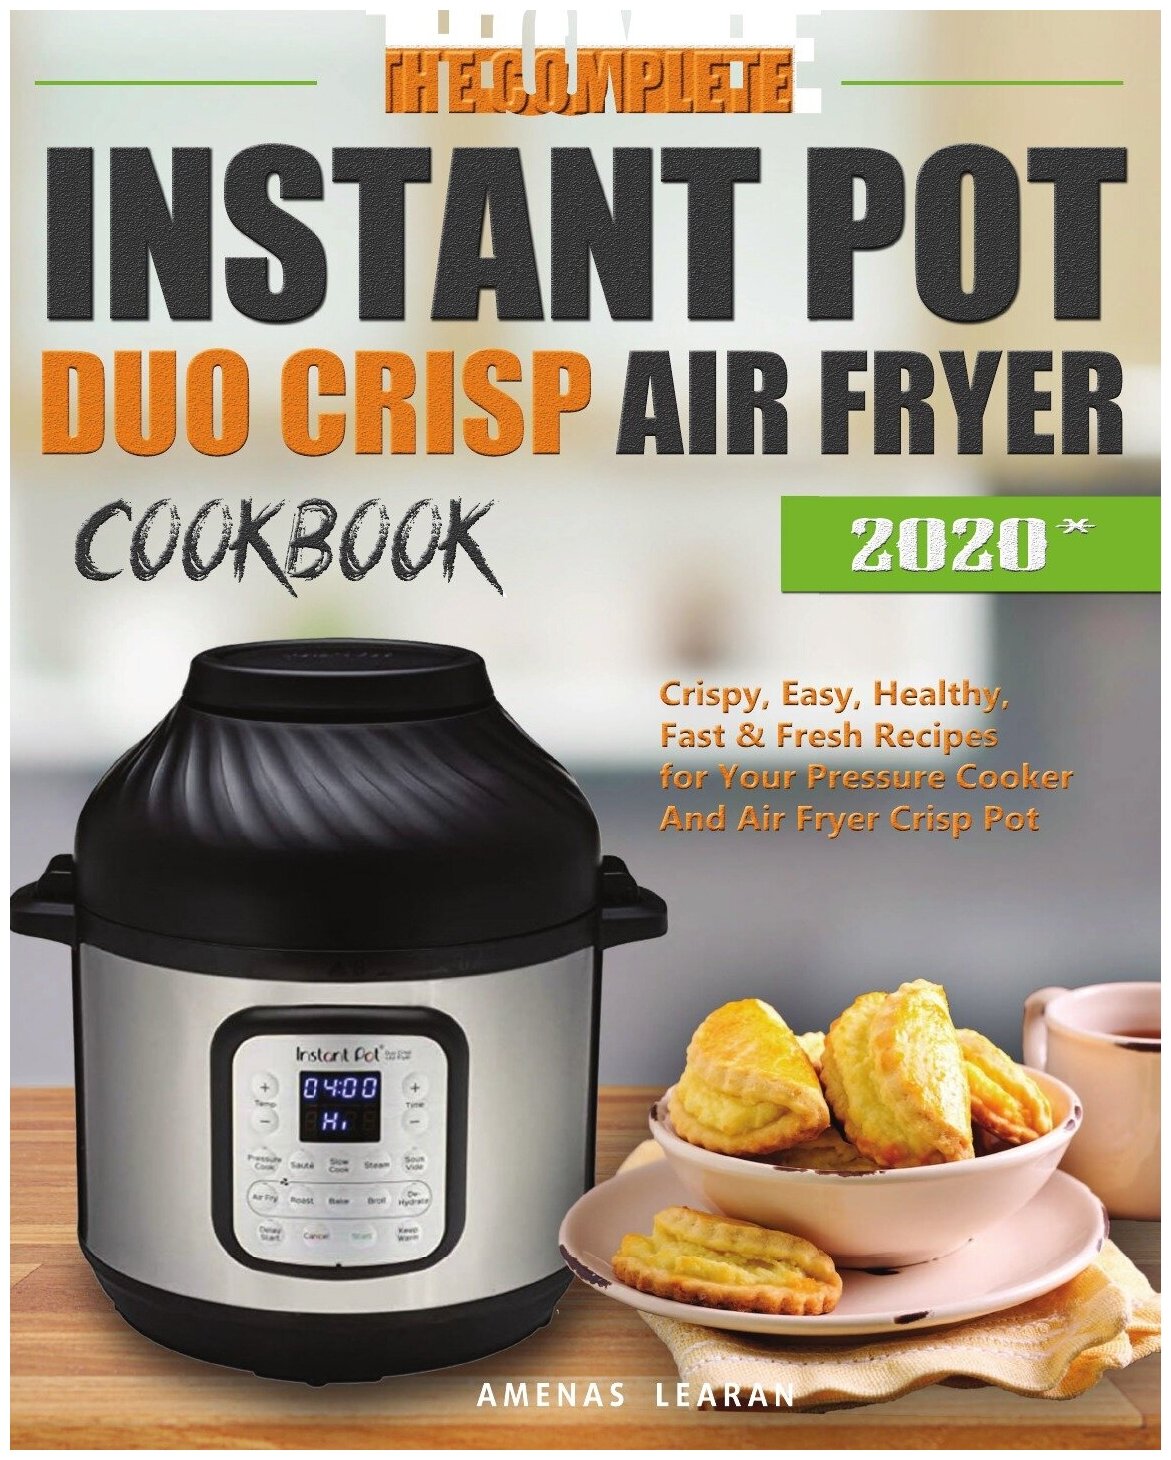 The Complete Instant Pot Duo Crisp Air Fryer Cookbook. Crispy, Easy, Healthy, Fast & Fresh Recipes for Your Pressure Cooker And Air Fryer Crisp Pot